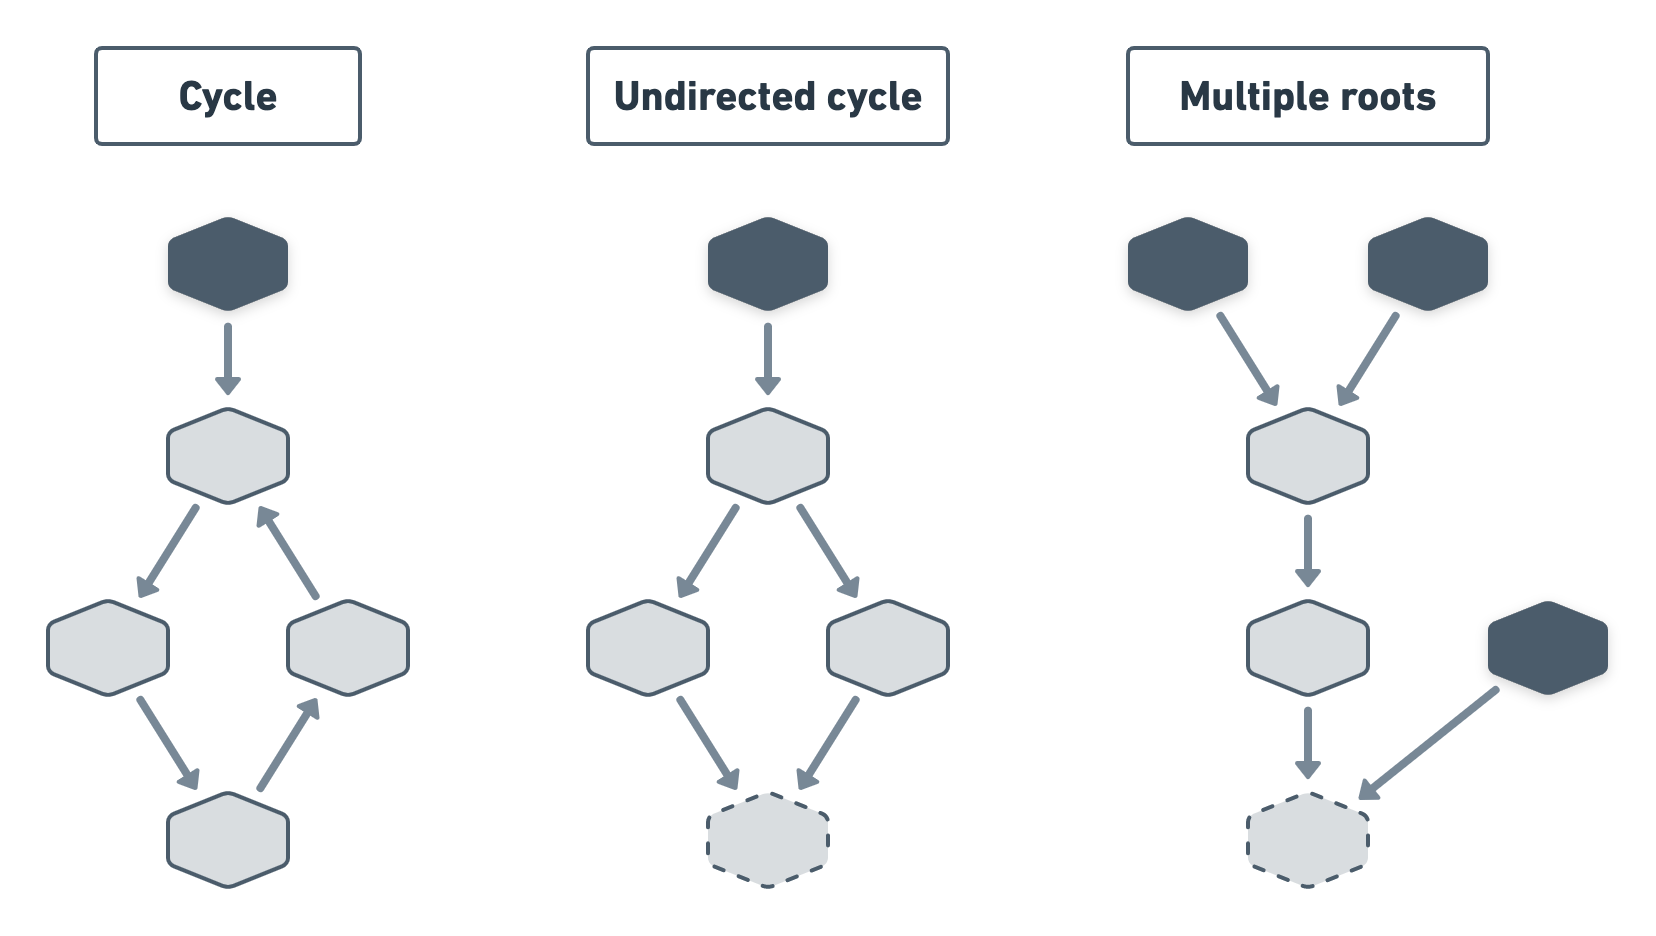 3 diagrams. From left to right: nodes forming a circular dependency; one node having multiple parents in a single-root cluster; a cluster of nodes with multiple roots.